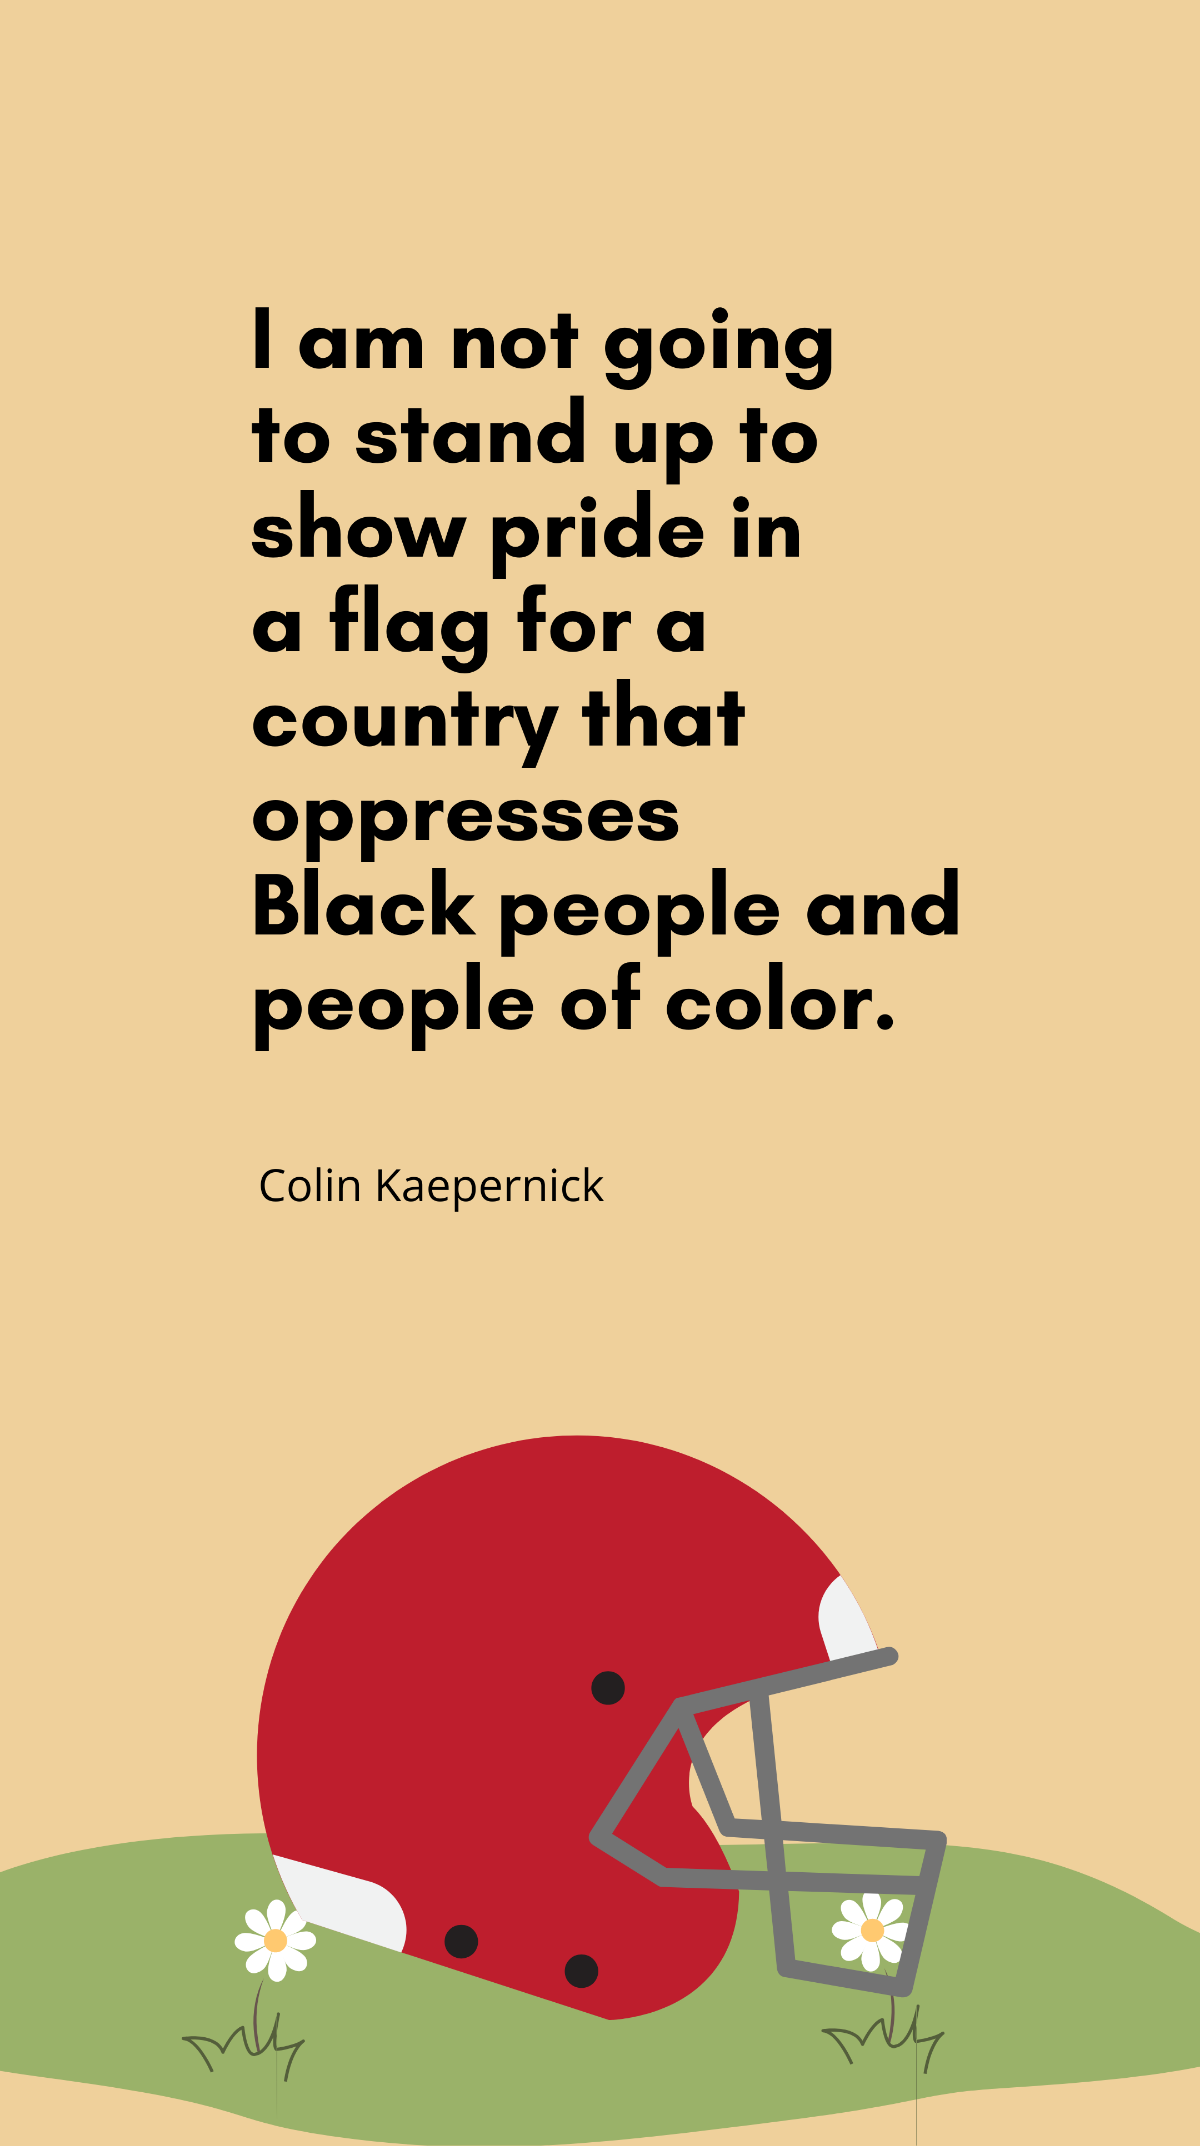 Colin Kaepernick - I am not going to stand up to show pride in a flag for a country that oppresses Black people and people of color. Template